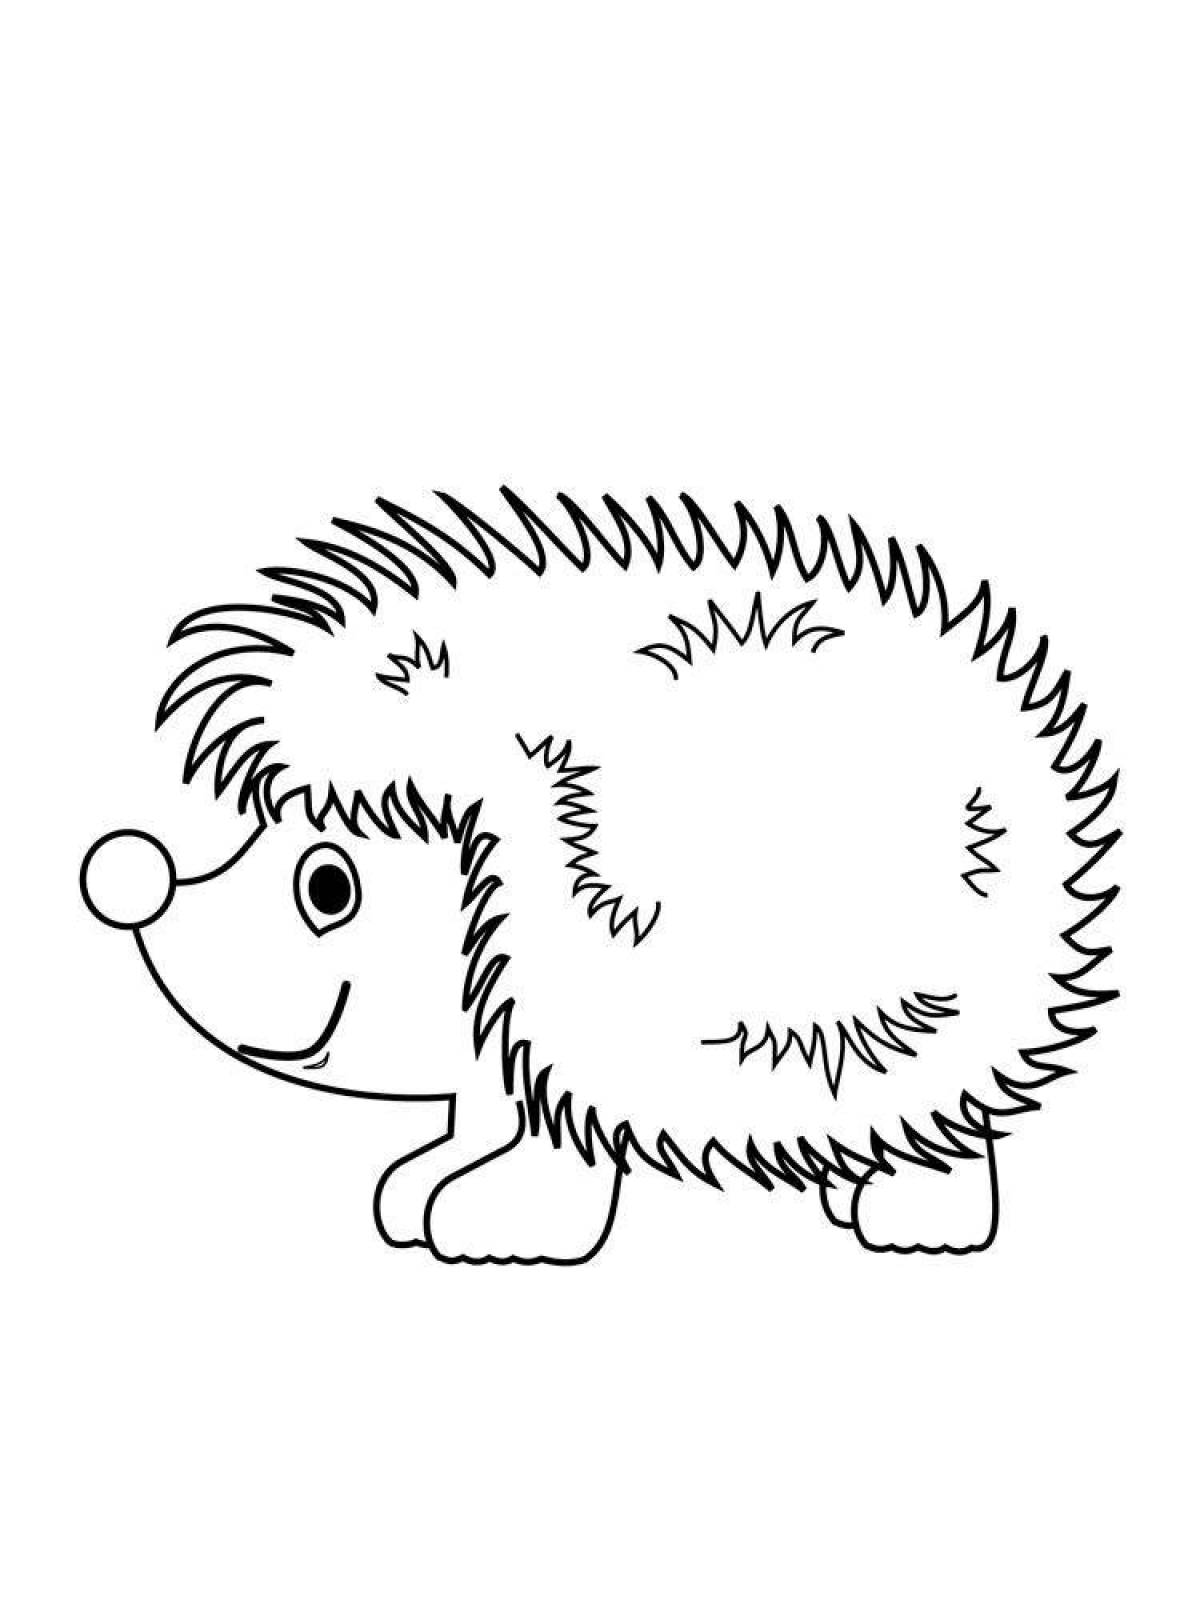 Funky hedgehog coloring pages for kids